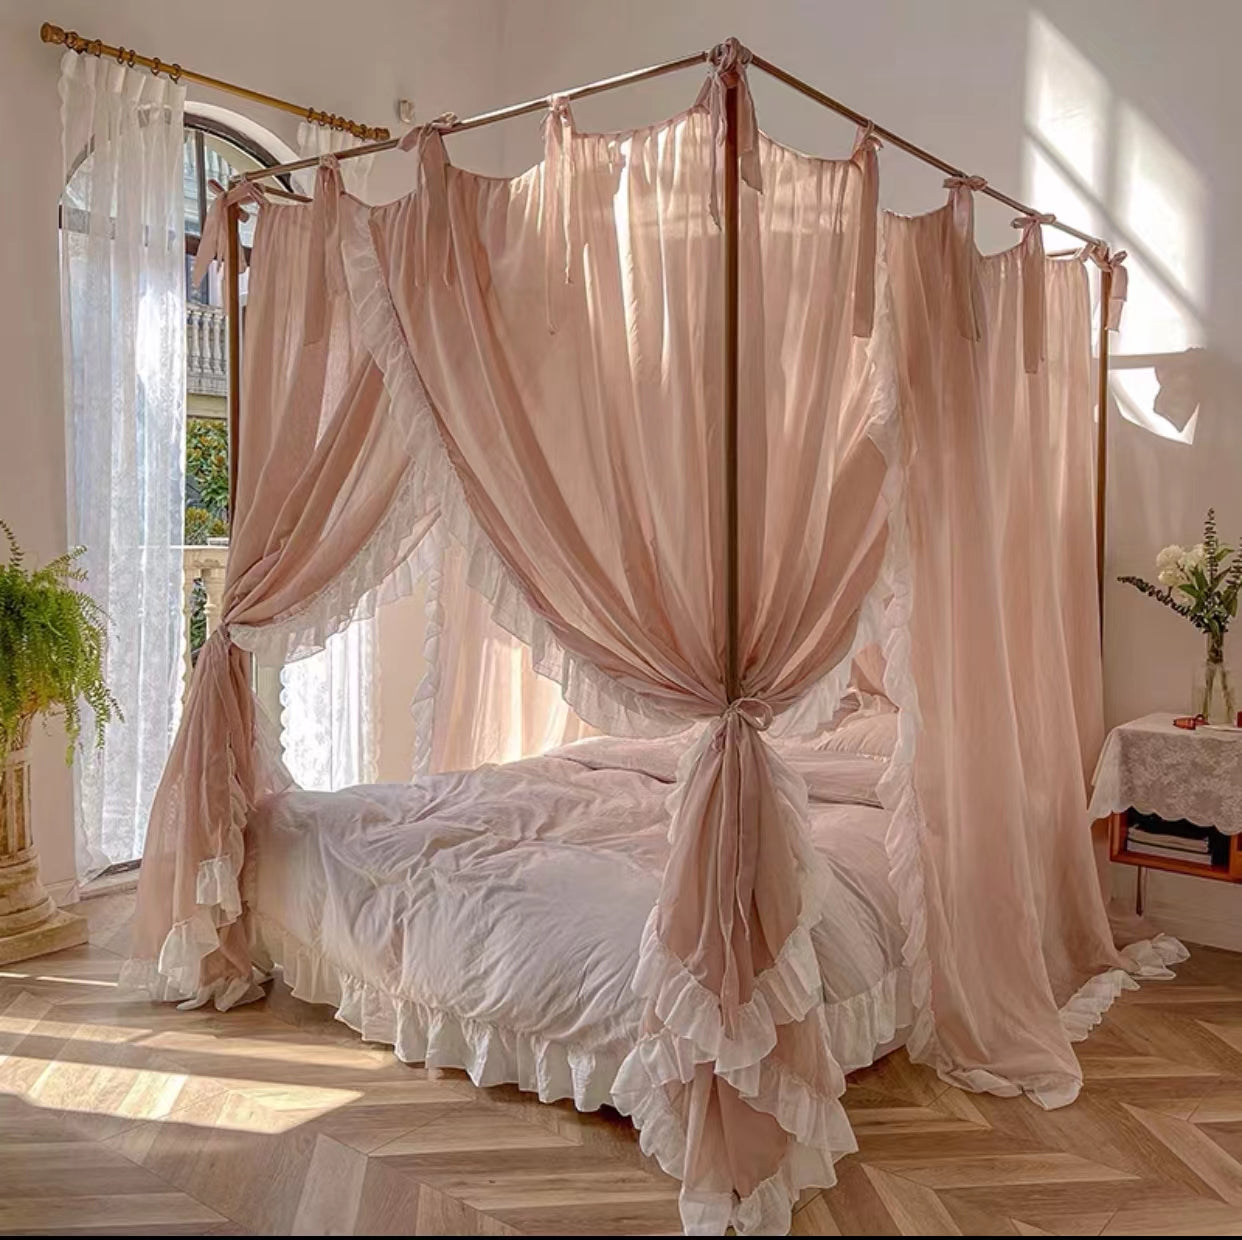 Gracie Linen Bed Canopy With Wood Frame - 4 Seasons Home Gadgets